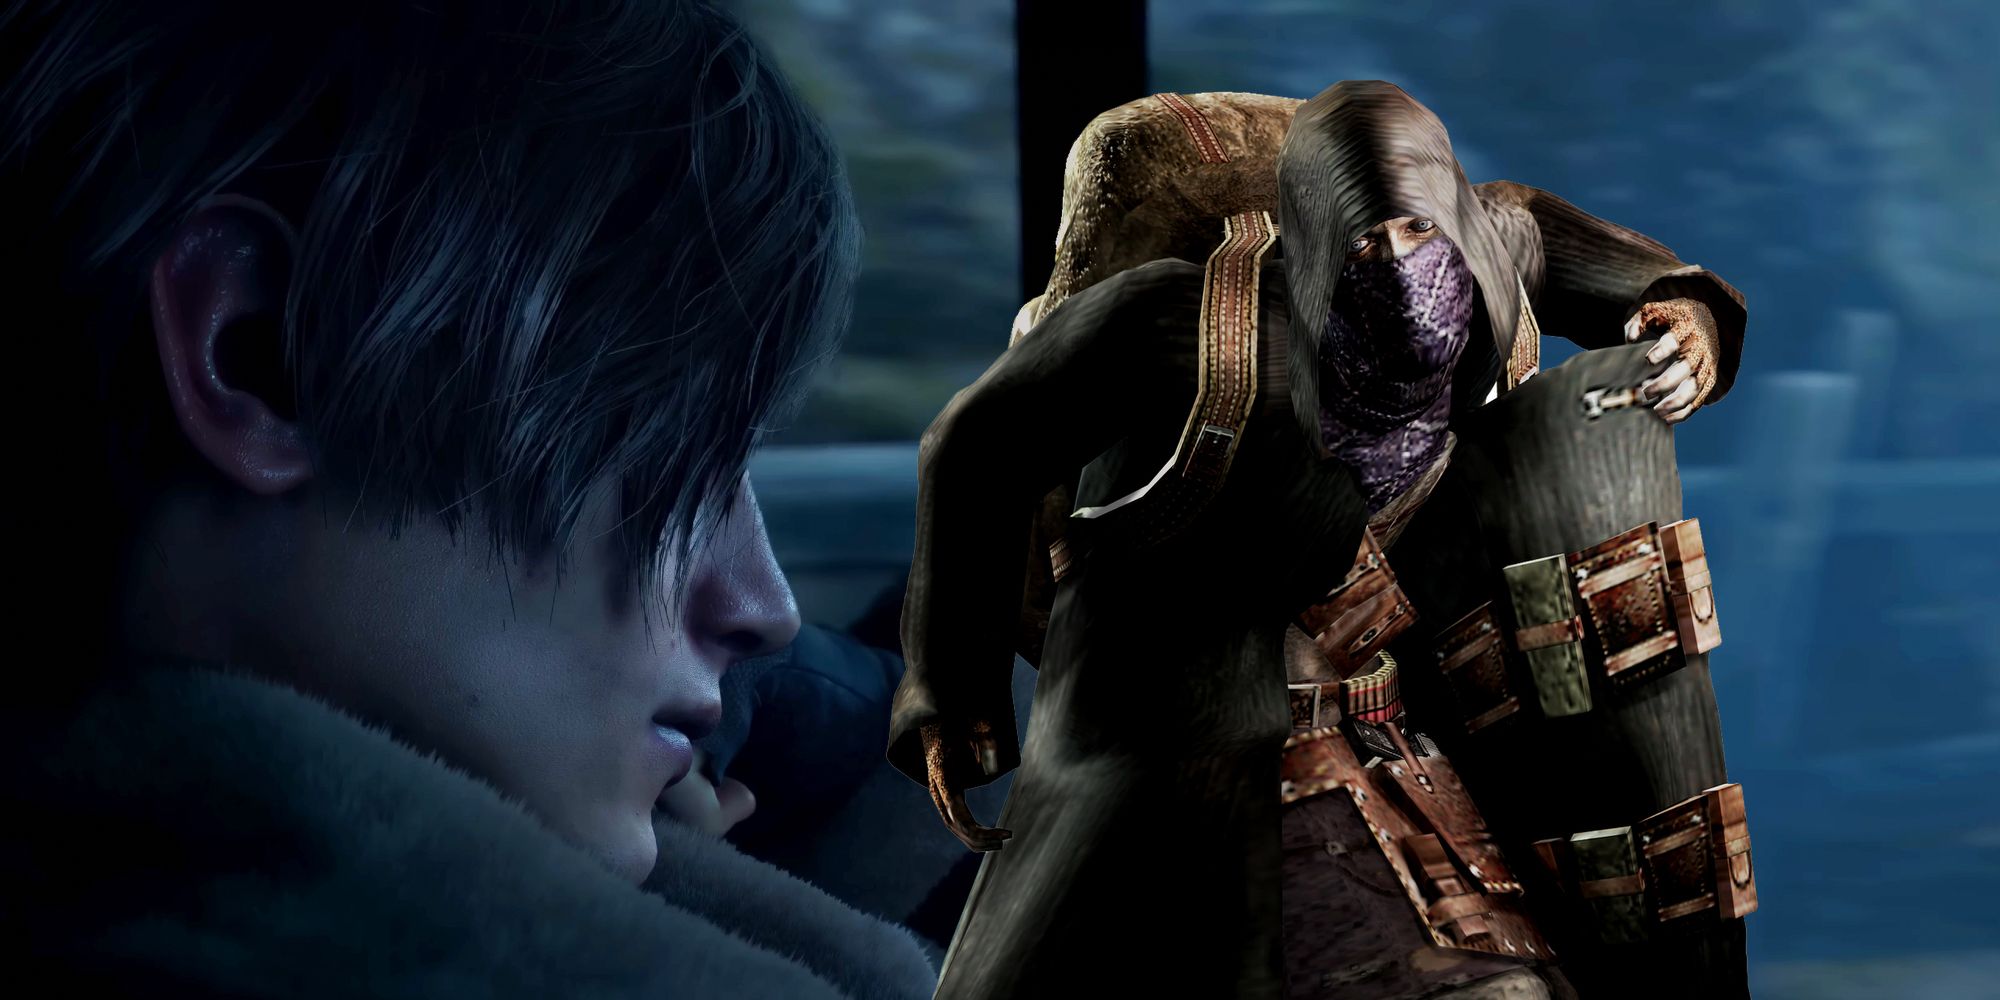 Resident Evil Characters Make Their Way Into State Of Survival